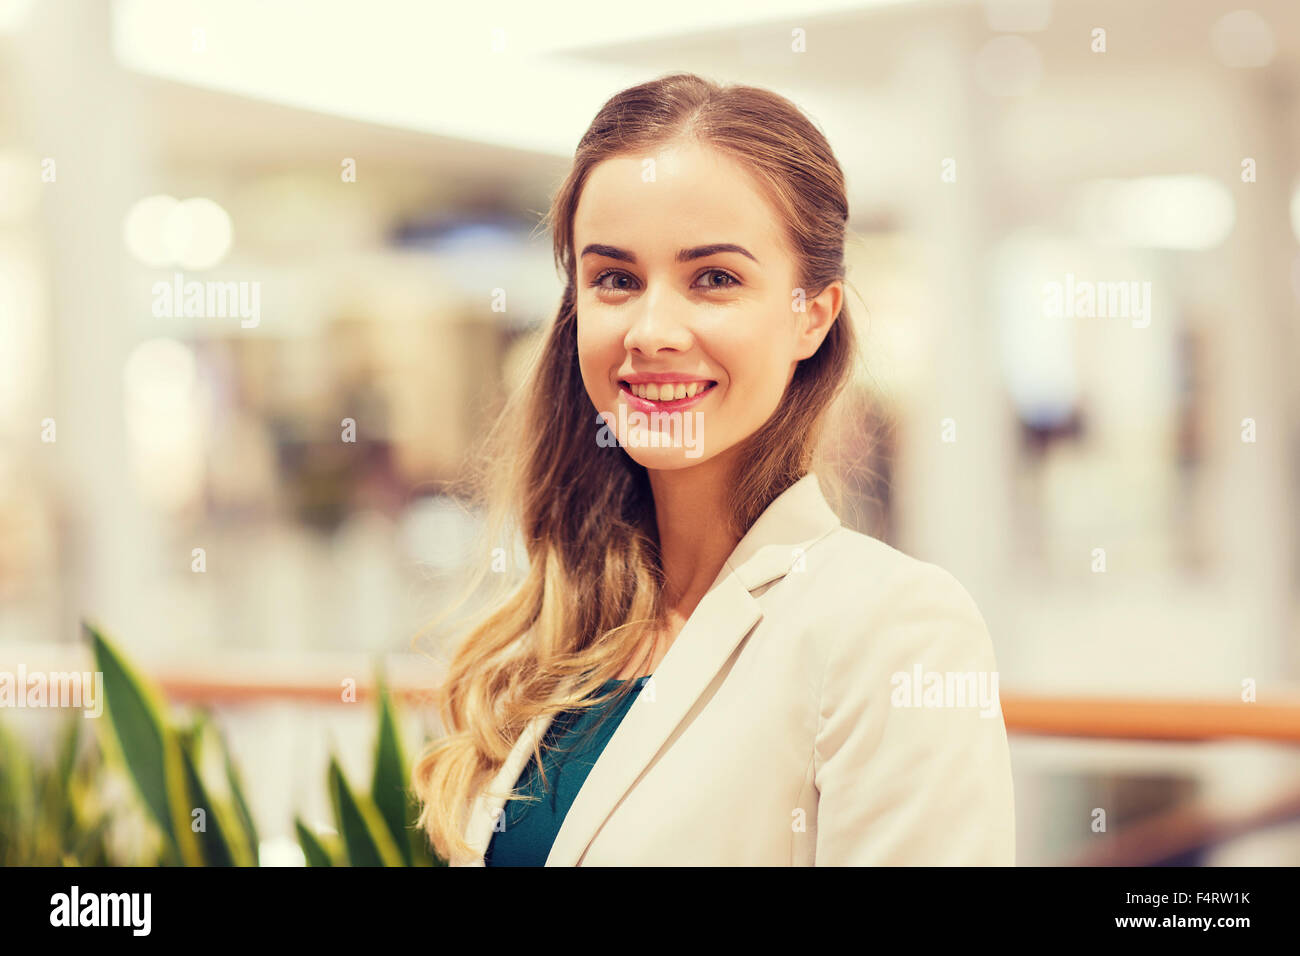 happy young woman in mall or business center Stock Photo